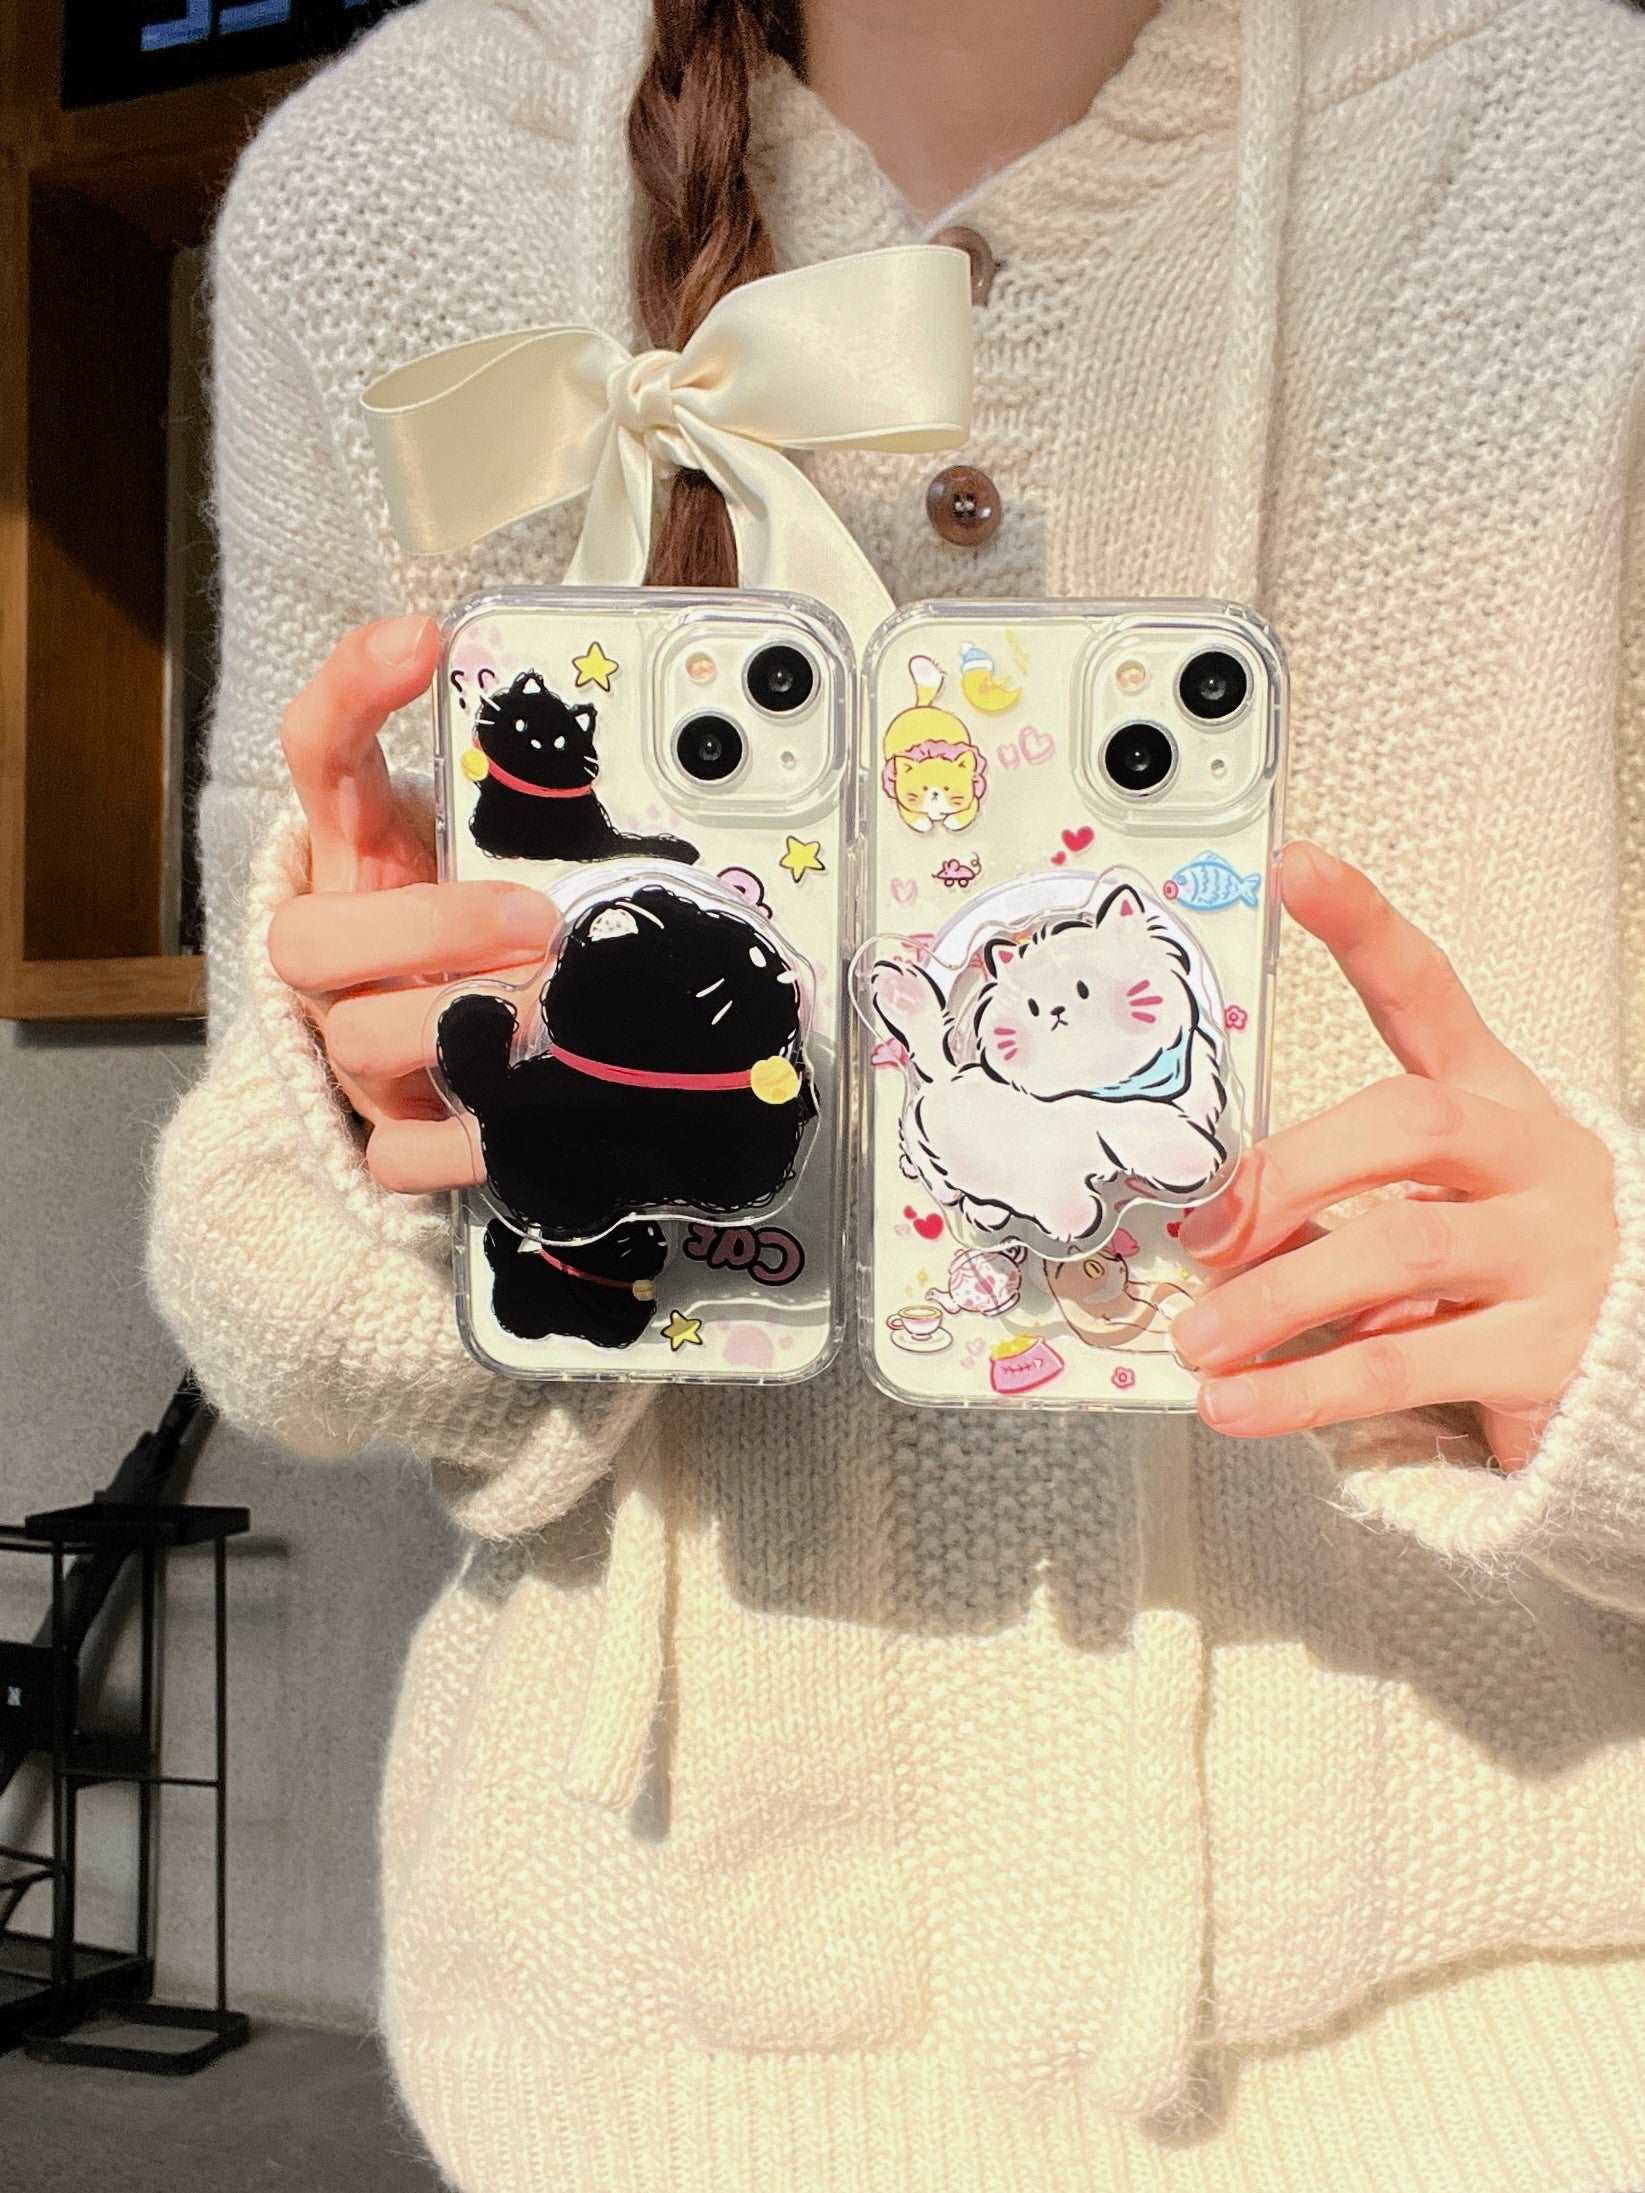 White Cat Black Cat Mobile Phone Case, Y2K Pink Coquette Dark Coquette Magnatic iPhone Case for iPhone 11-15 Pro Max With Optional Acrylic Phone Holder for Cat Lovers